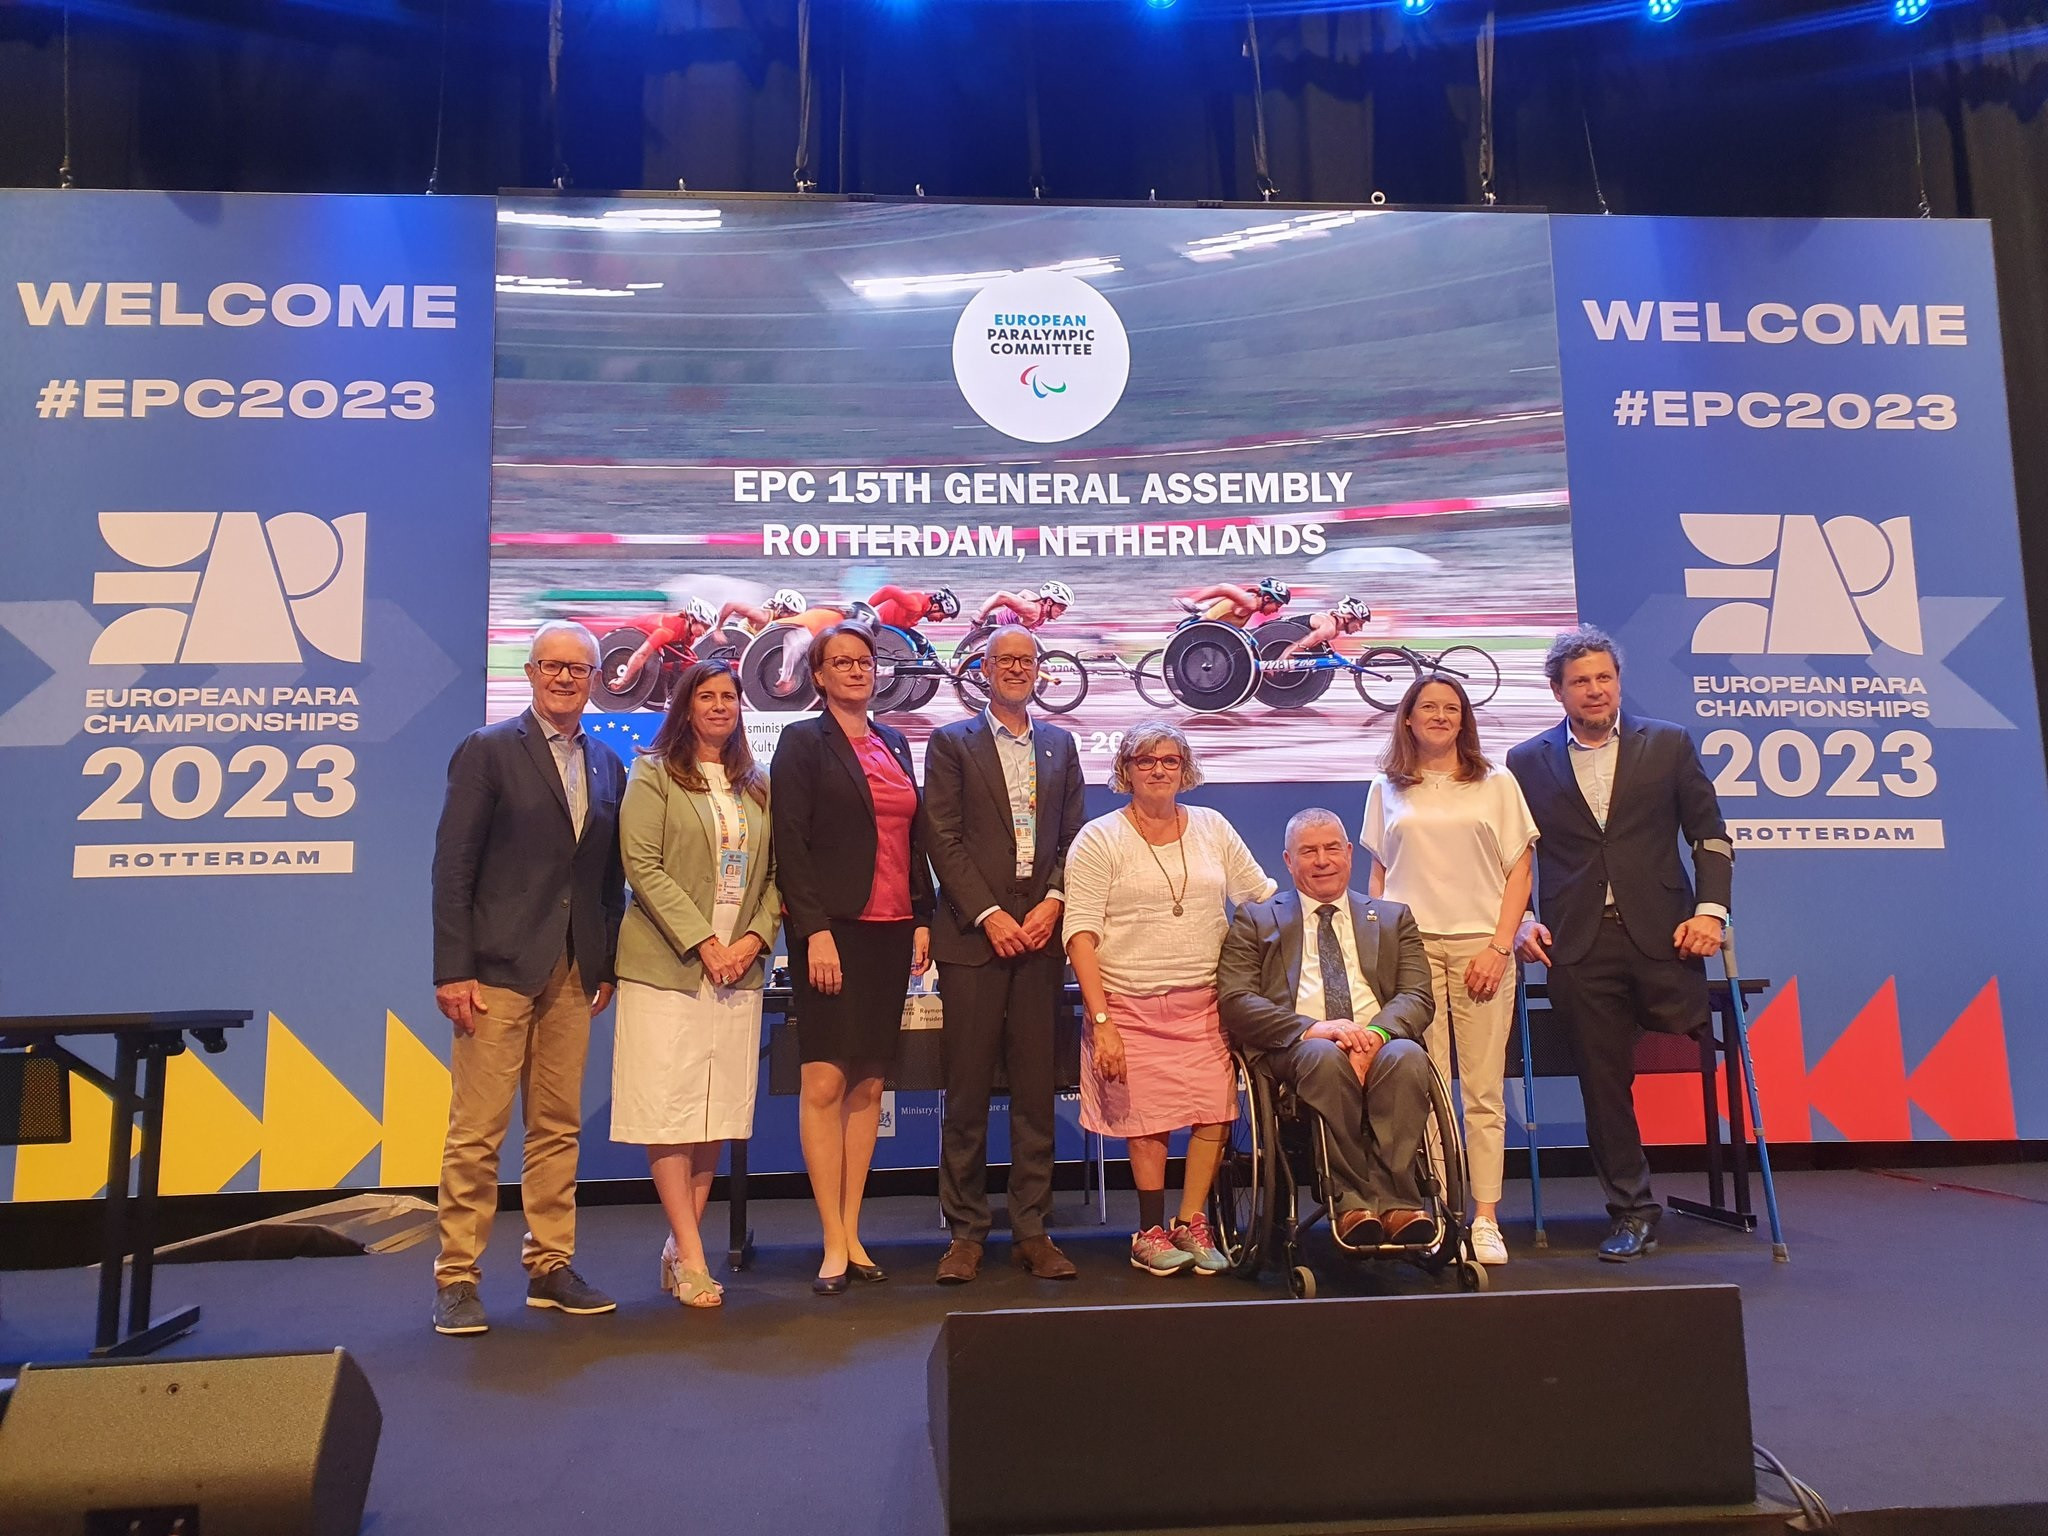 The European Paralympic Committee is looking to create a new 